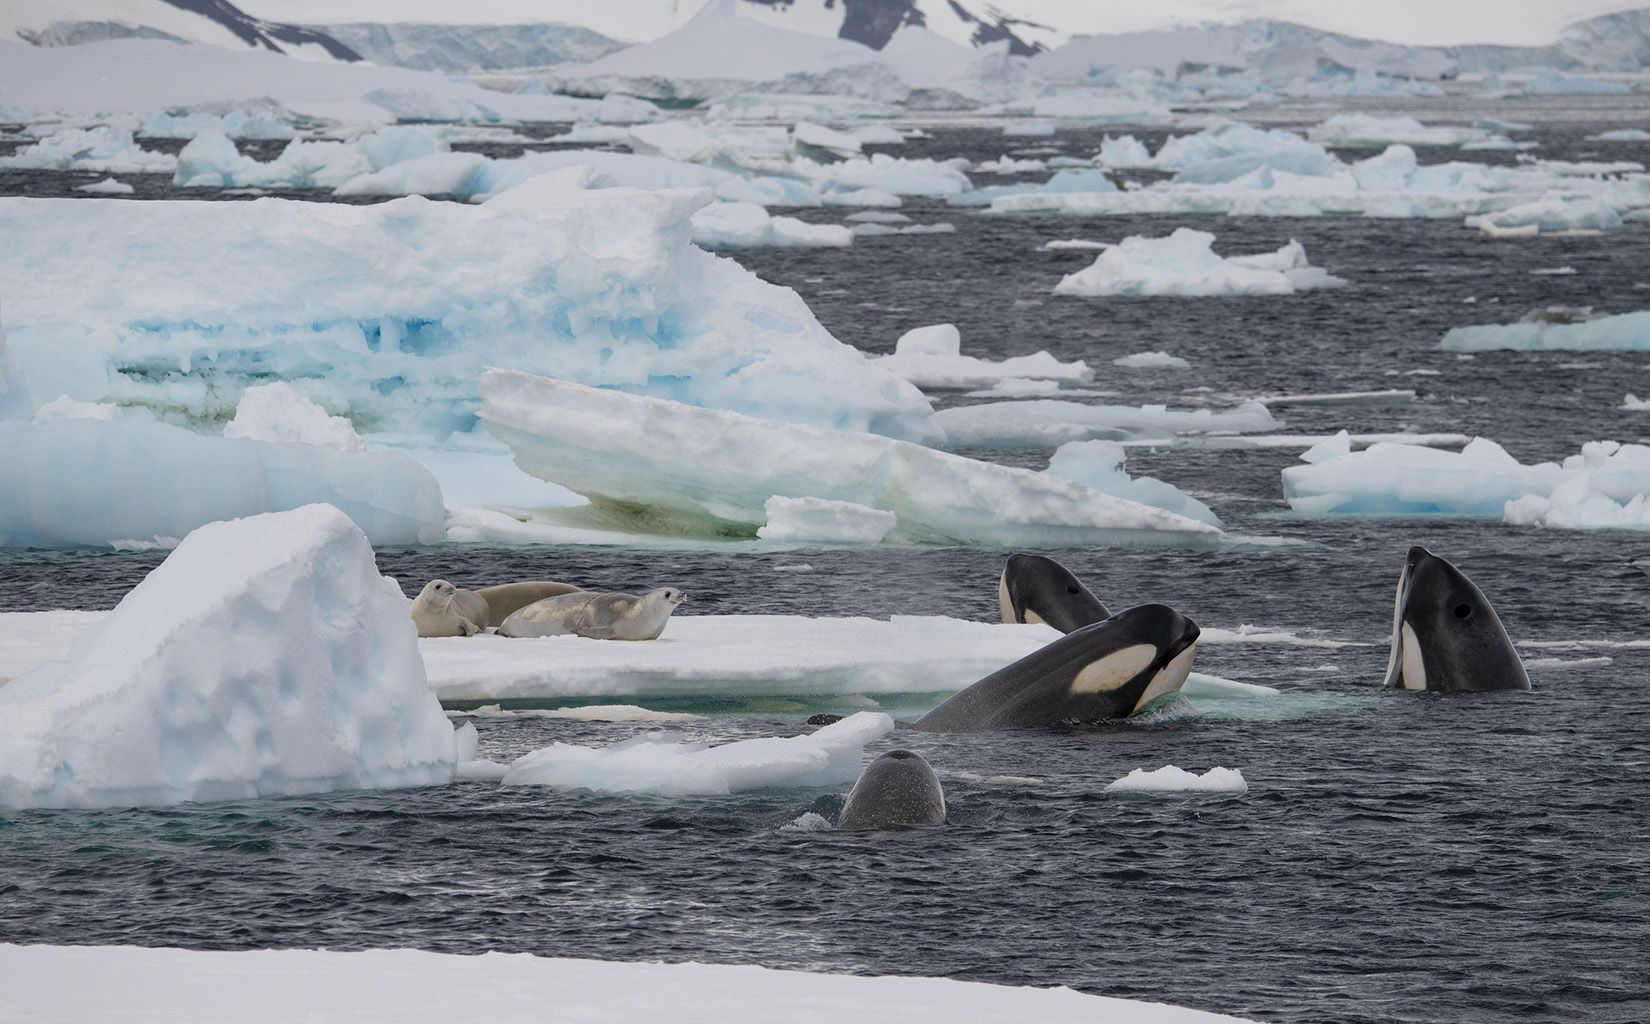 Four Killer Whales surrounding a group of Weddell Seals on an ice flow